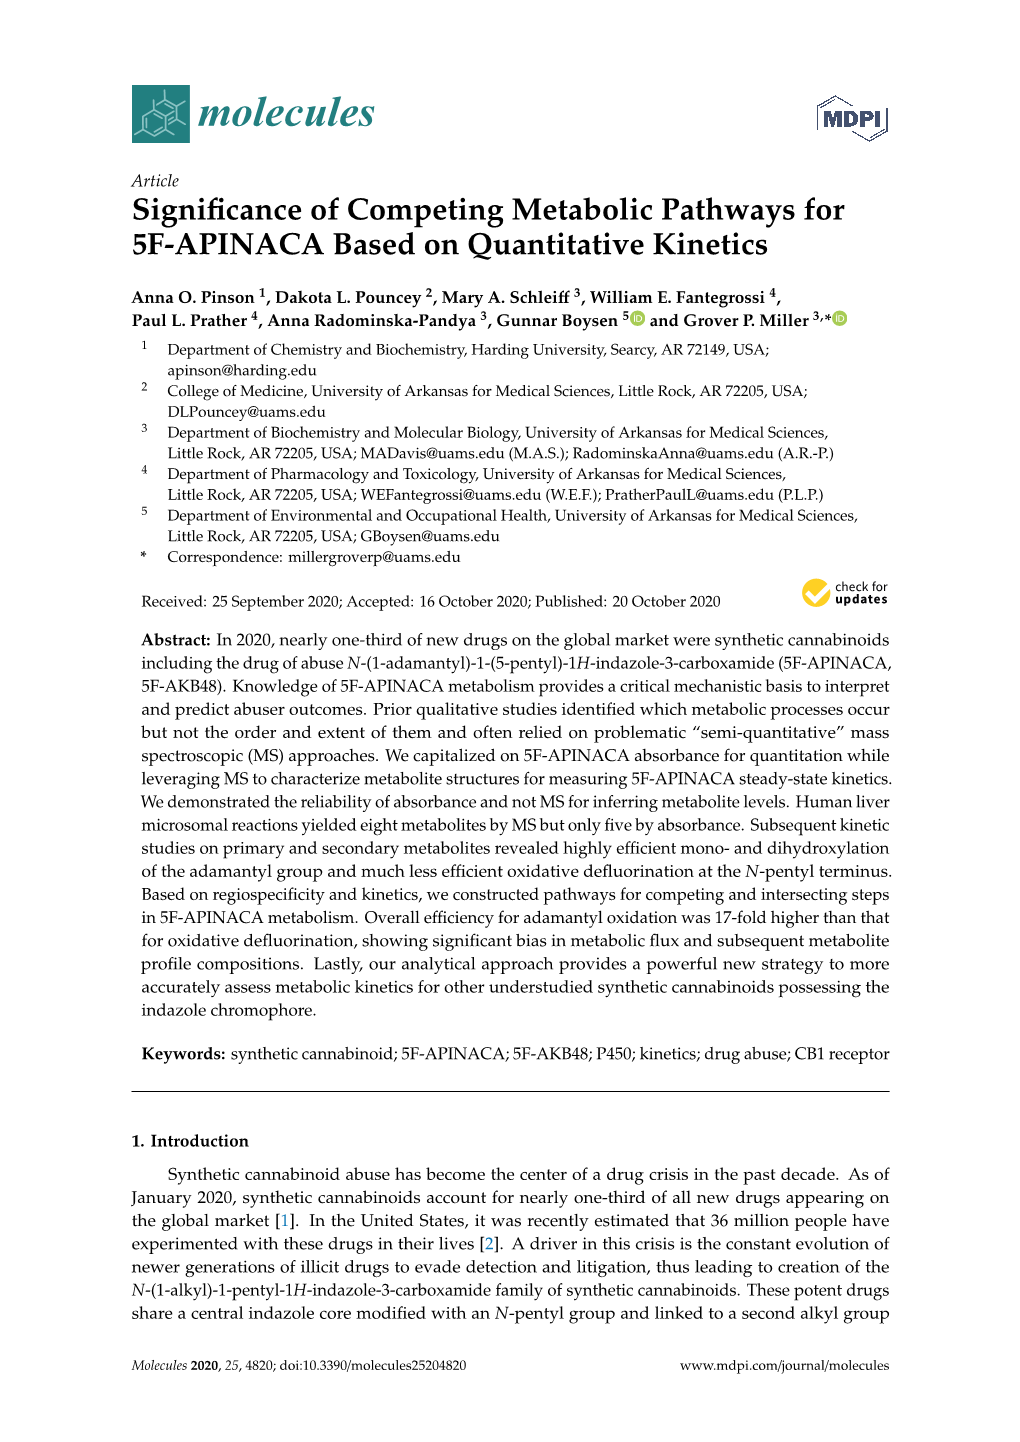 Significance of Competing Metabolic Pathways for 5F-APINACA Based